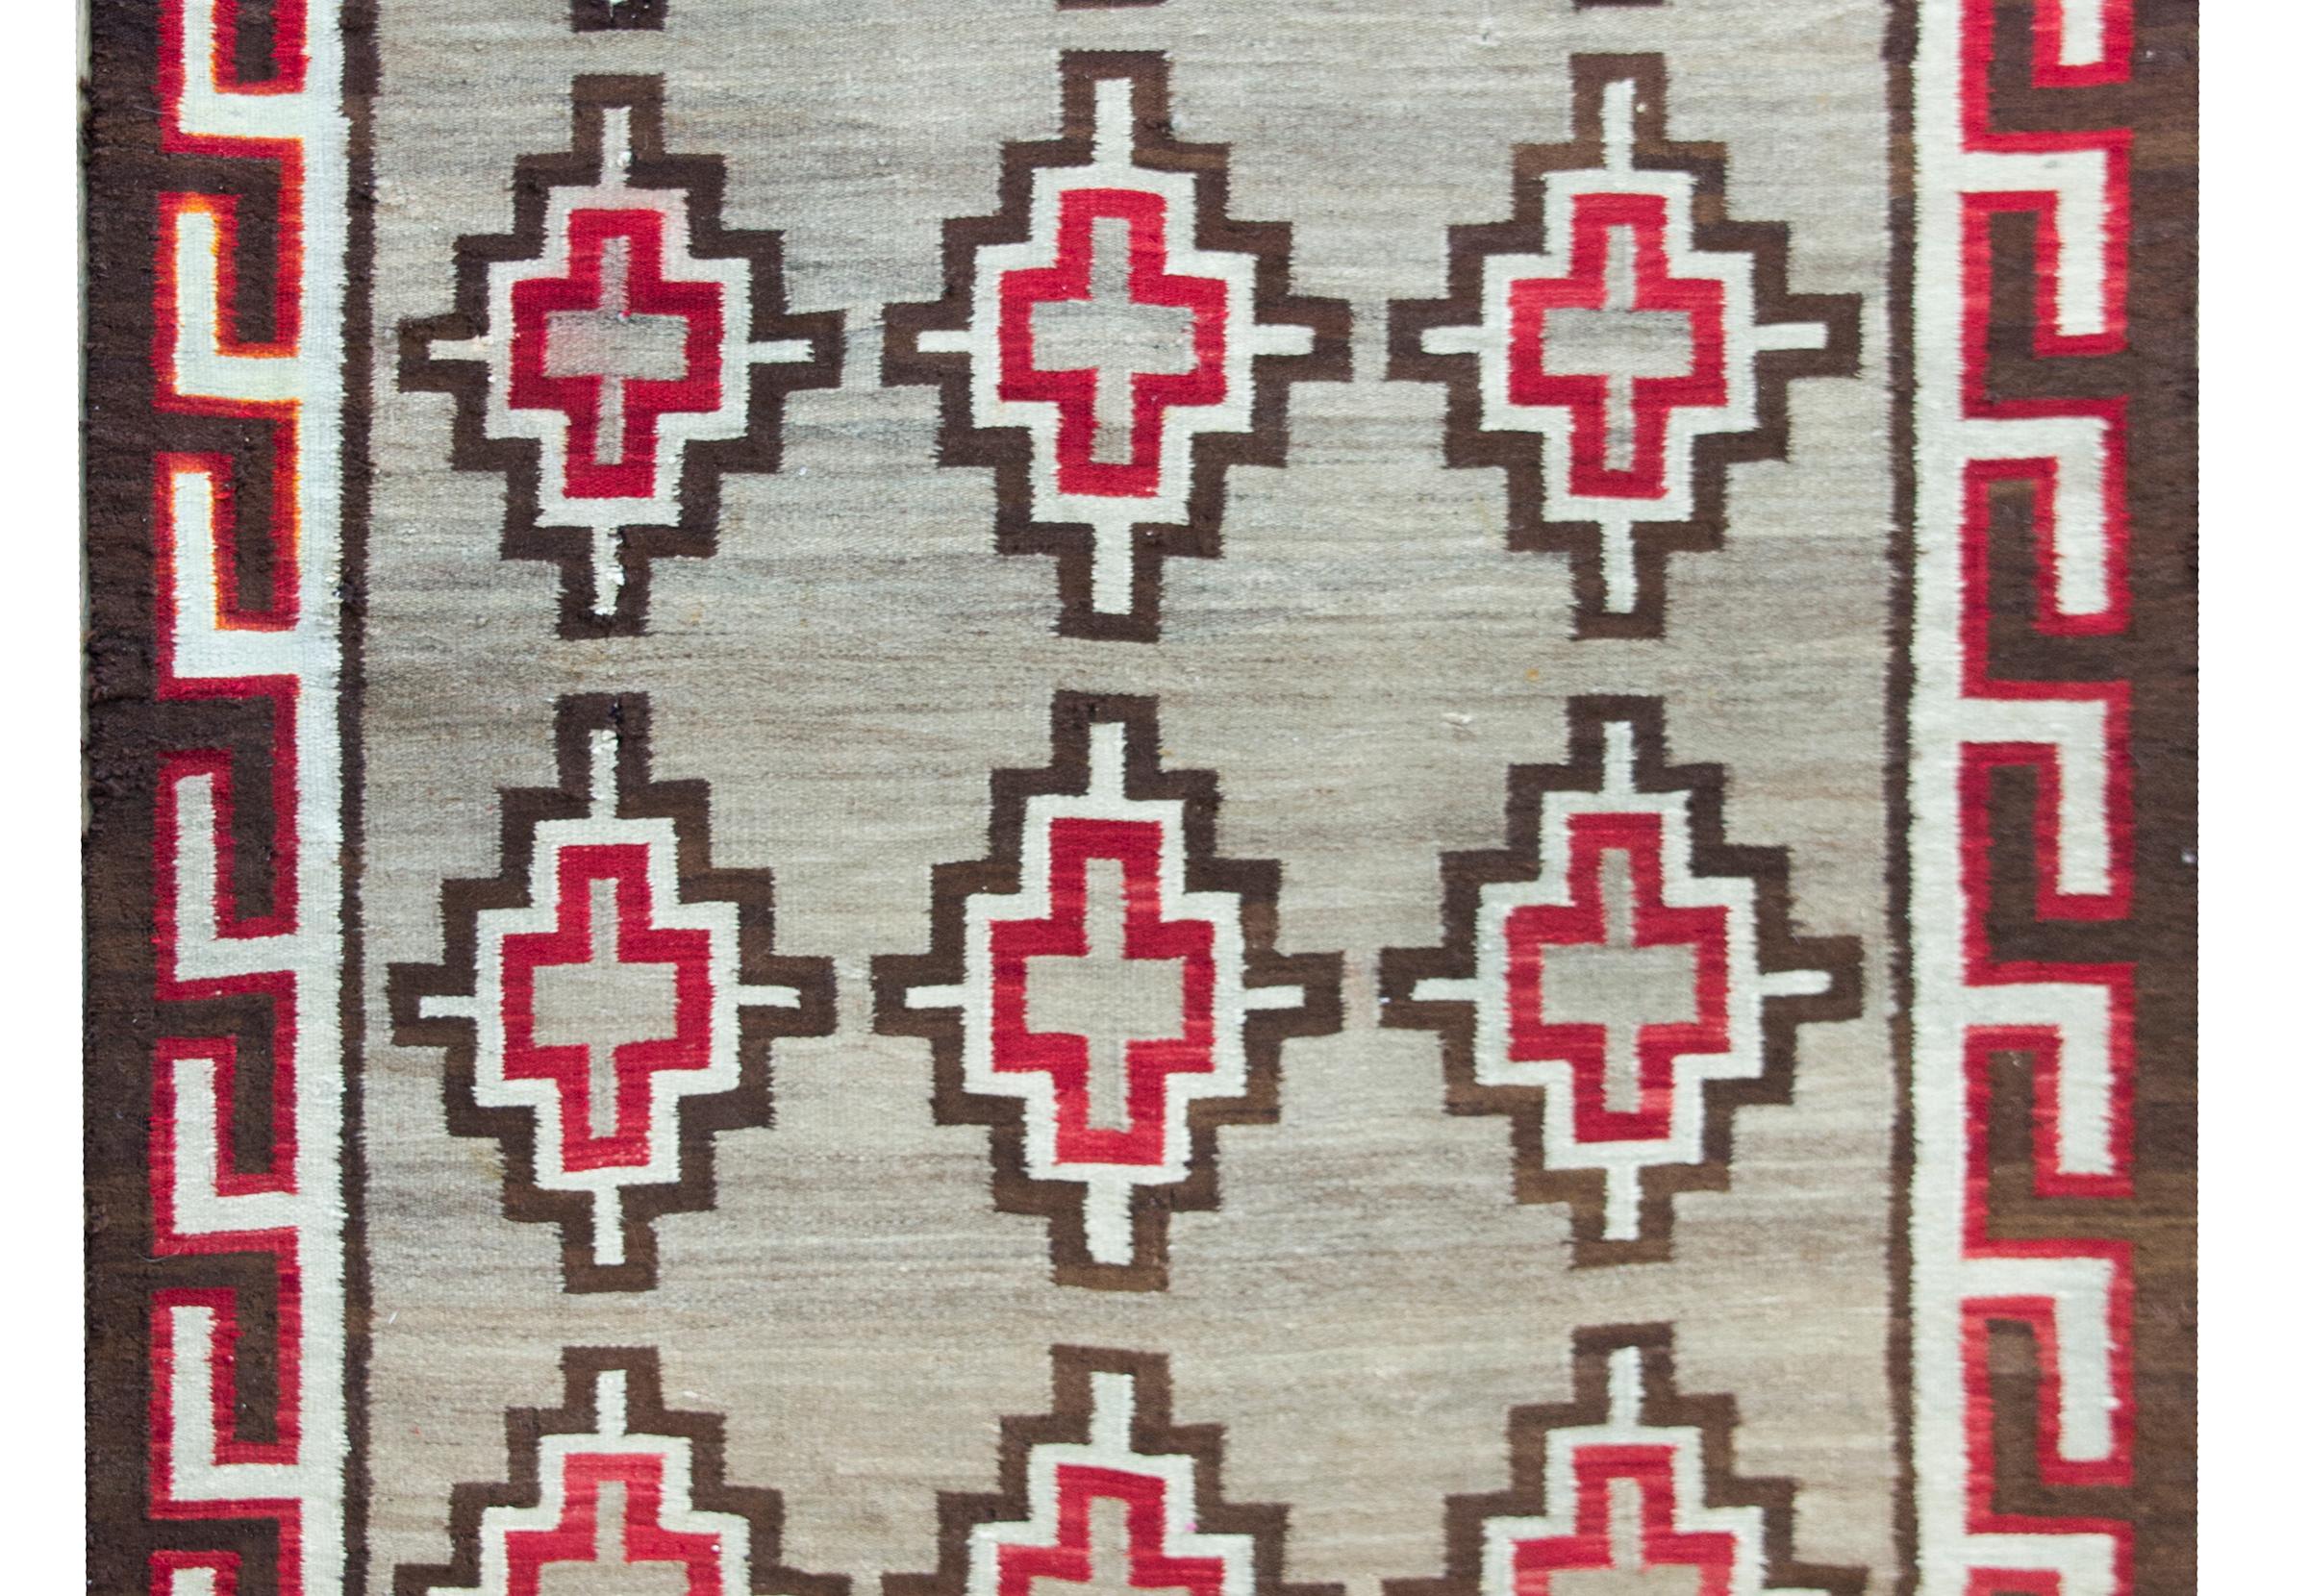 A striking early 20th century Navajo rug with an all-over stepped diamond pattern with crimson, white, and black stripes, set against an abrash natural gray wool ground, and surrounded by a meandering motif border.